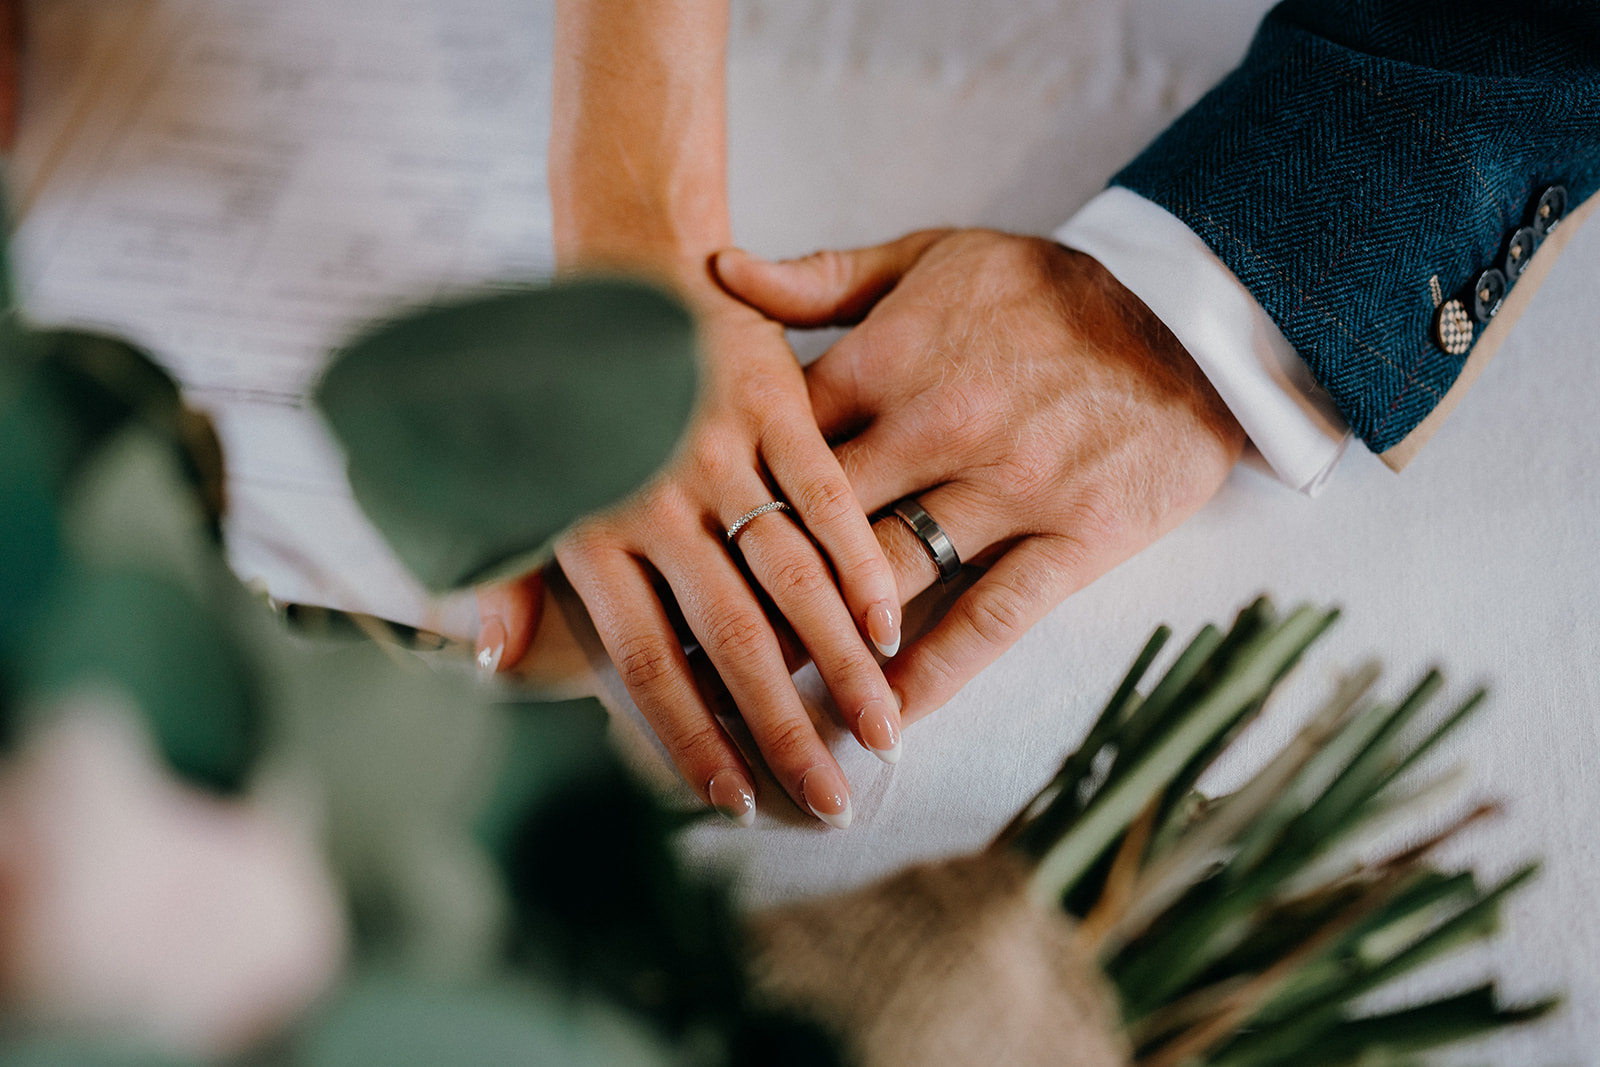 Bride and Grooms hands together showing their wedding rings.